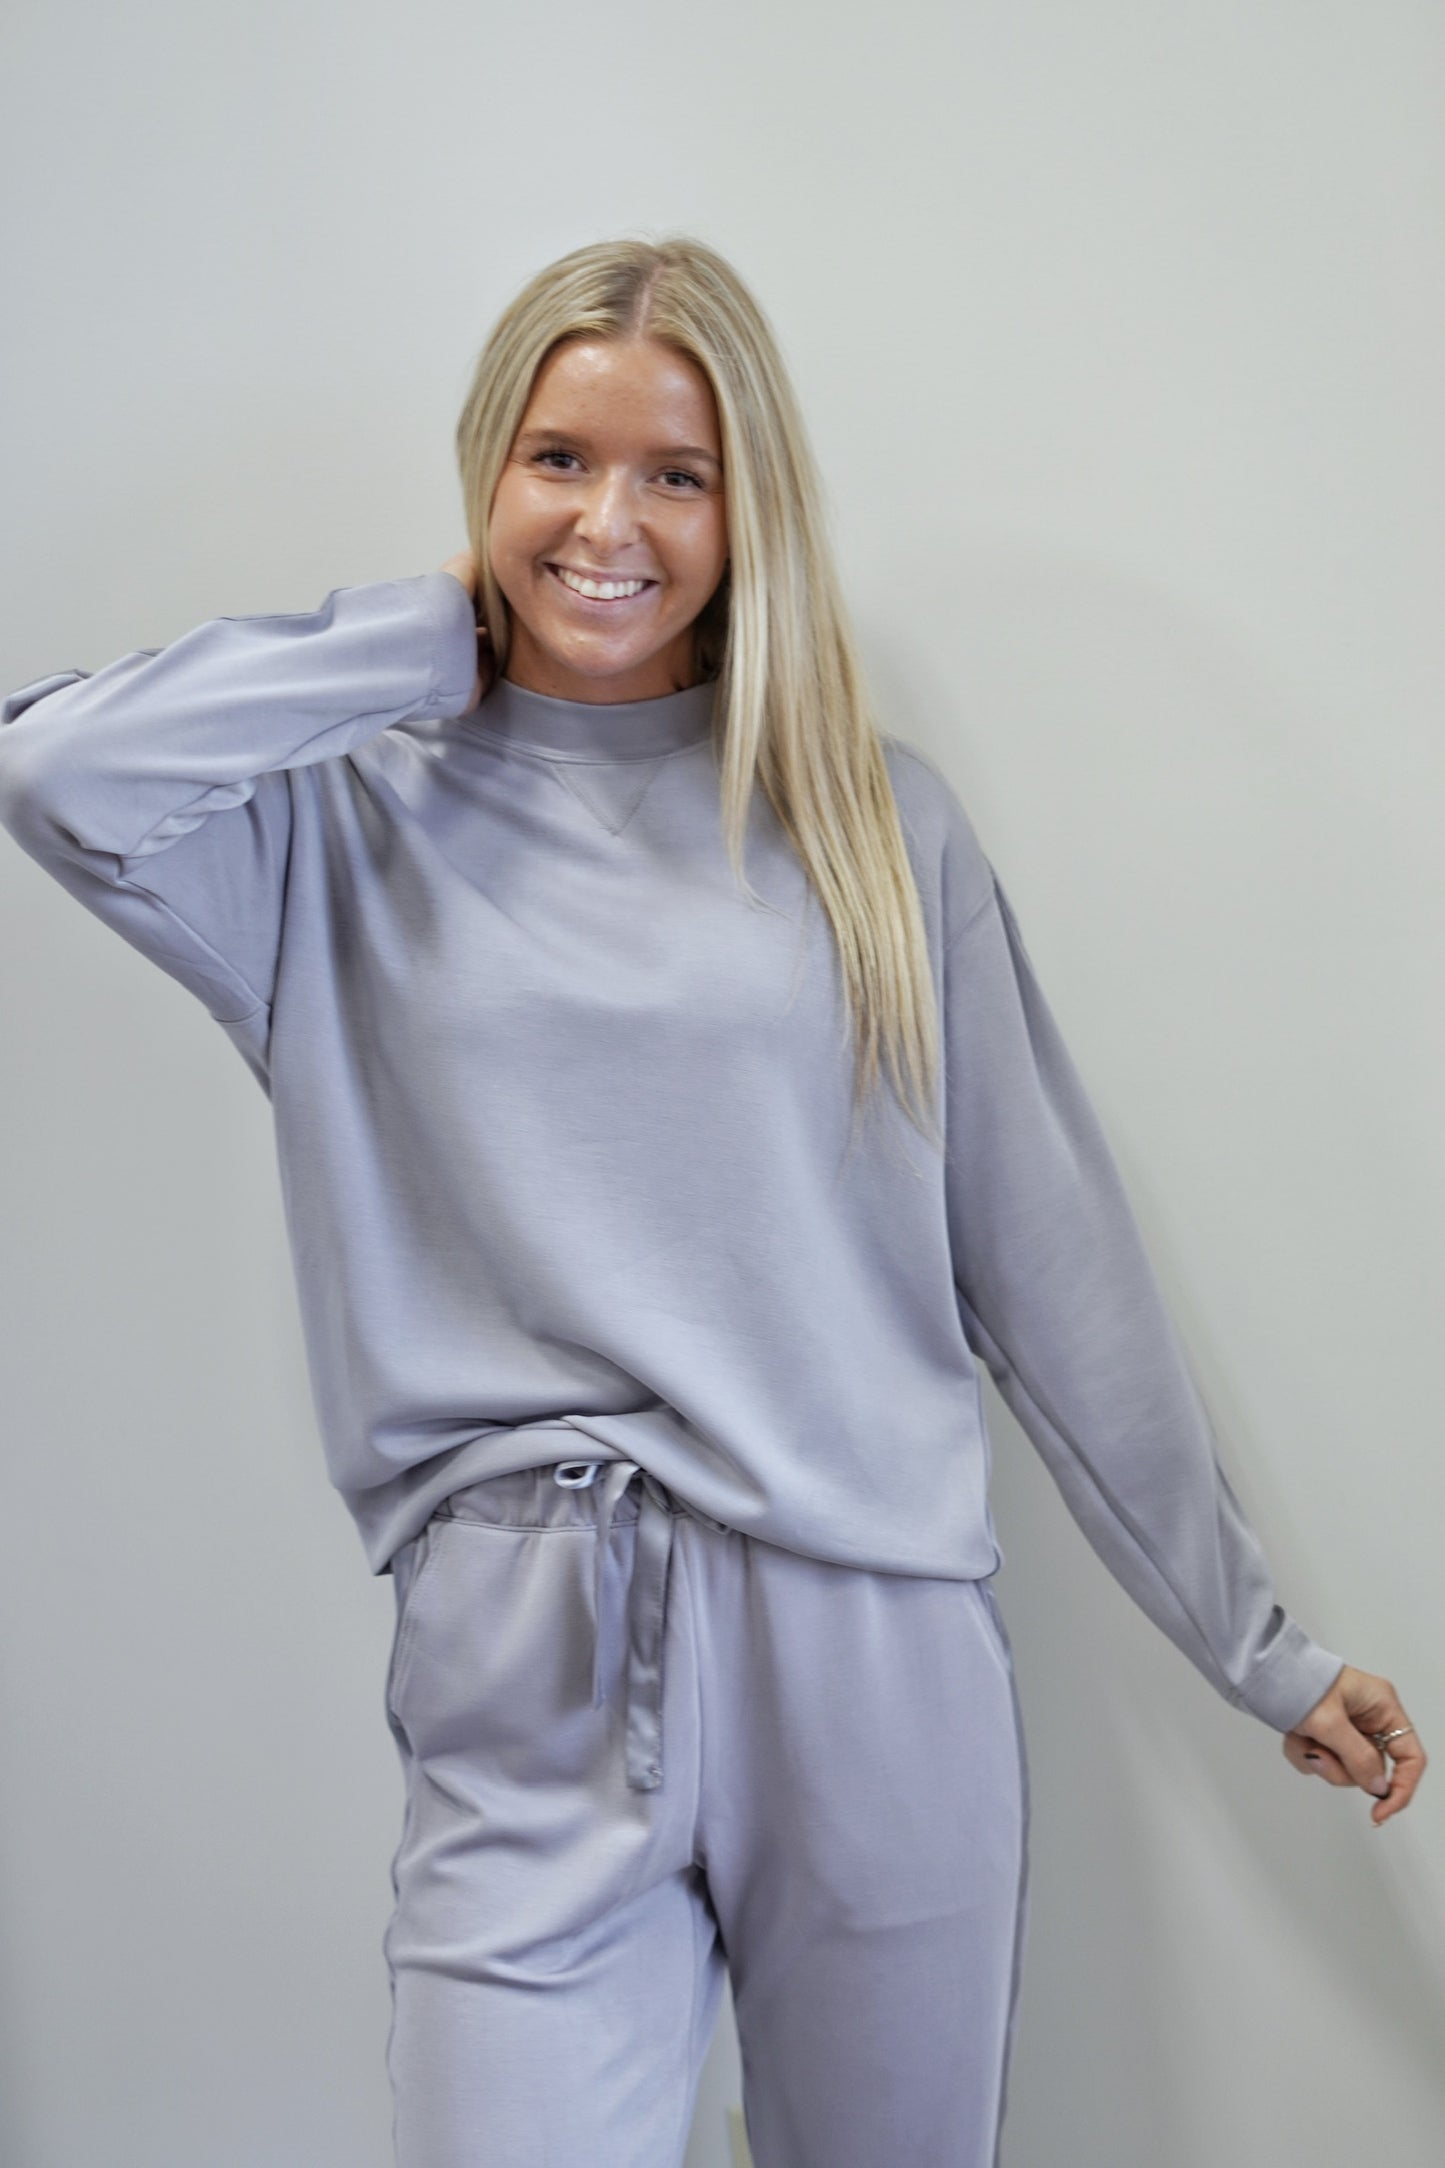 So Sleek Satin Trim Crew Neck Top Crew Neckline Long Sleeves Satin Trim on Sleeves Colors:  Mystic Grey Full Length Relaxed Fit 48% Modal, 46% Polyester, 6% Spandex